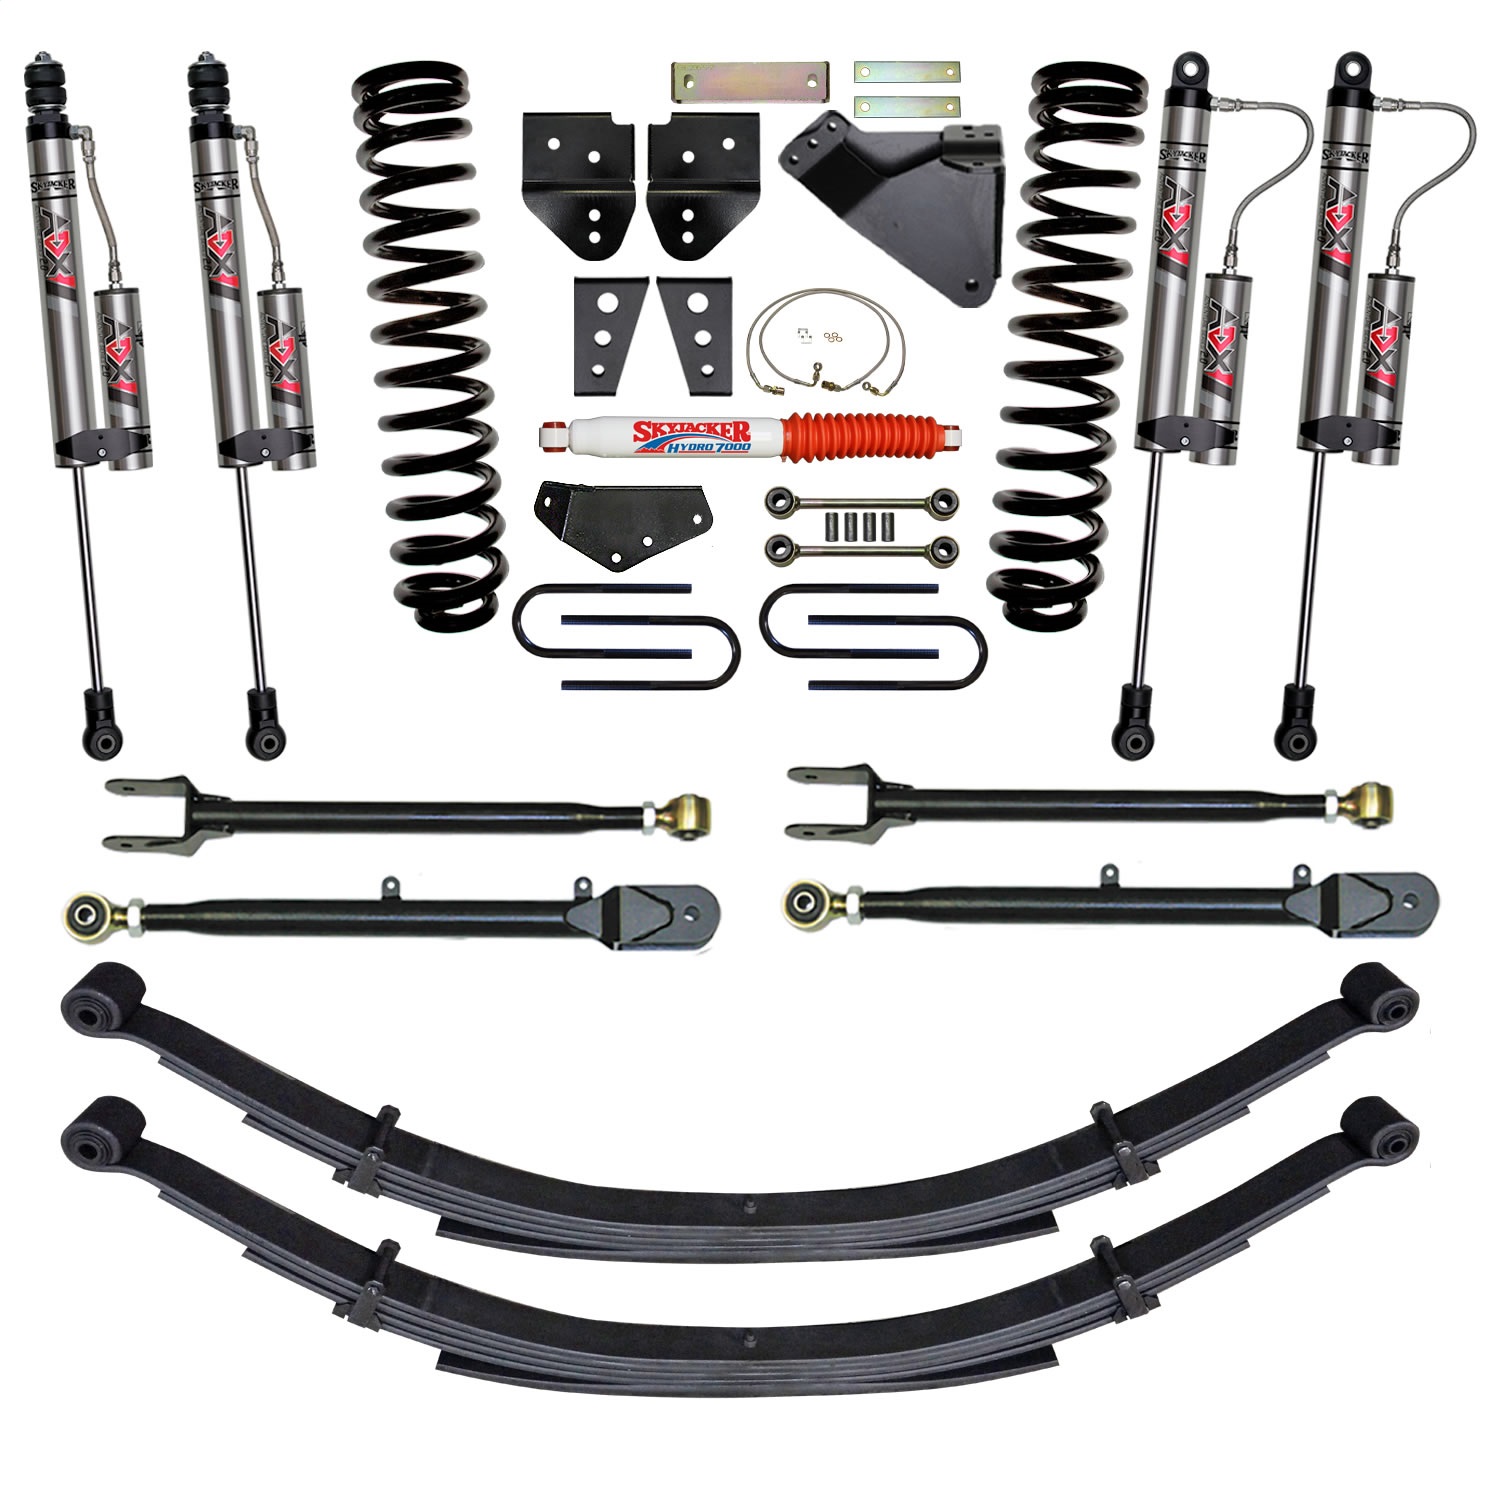 8-10 Ford SD ADX 8.5 Lift